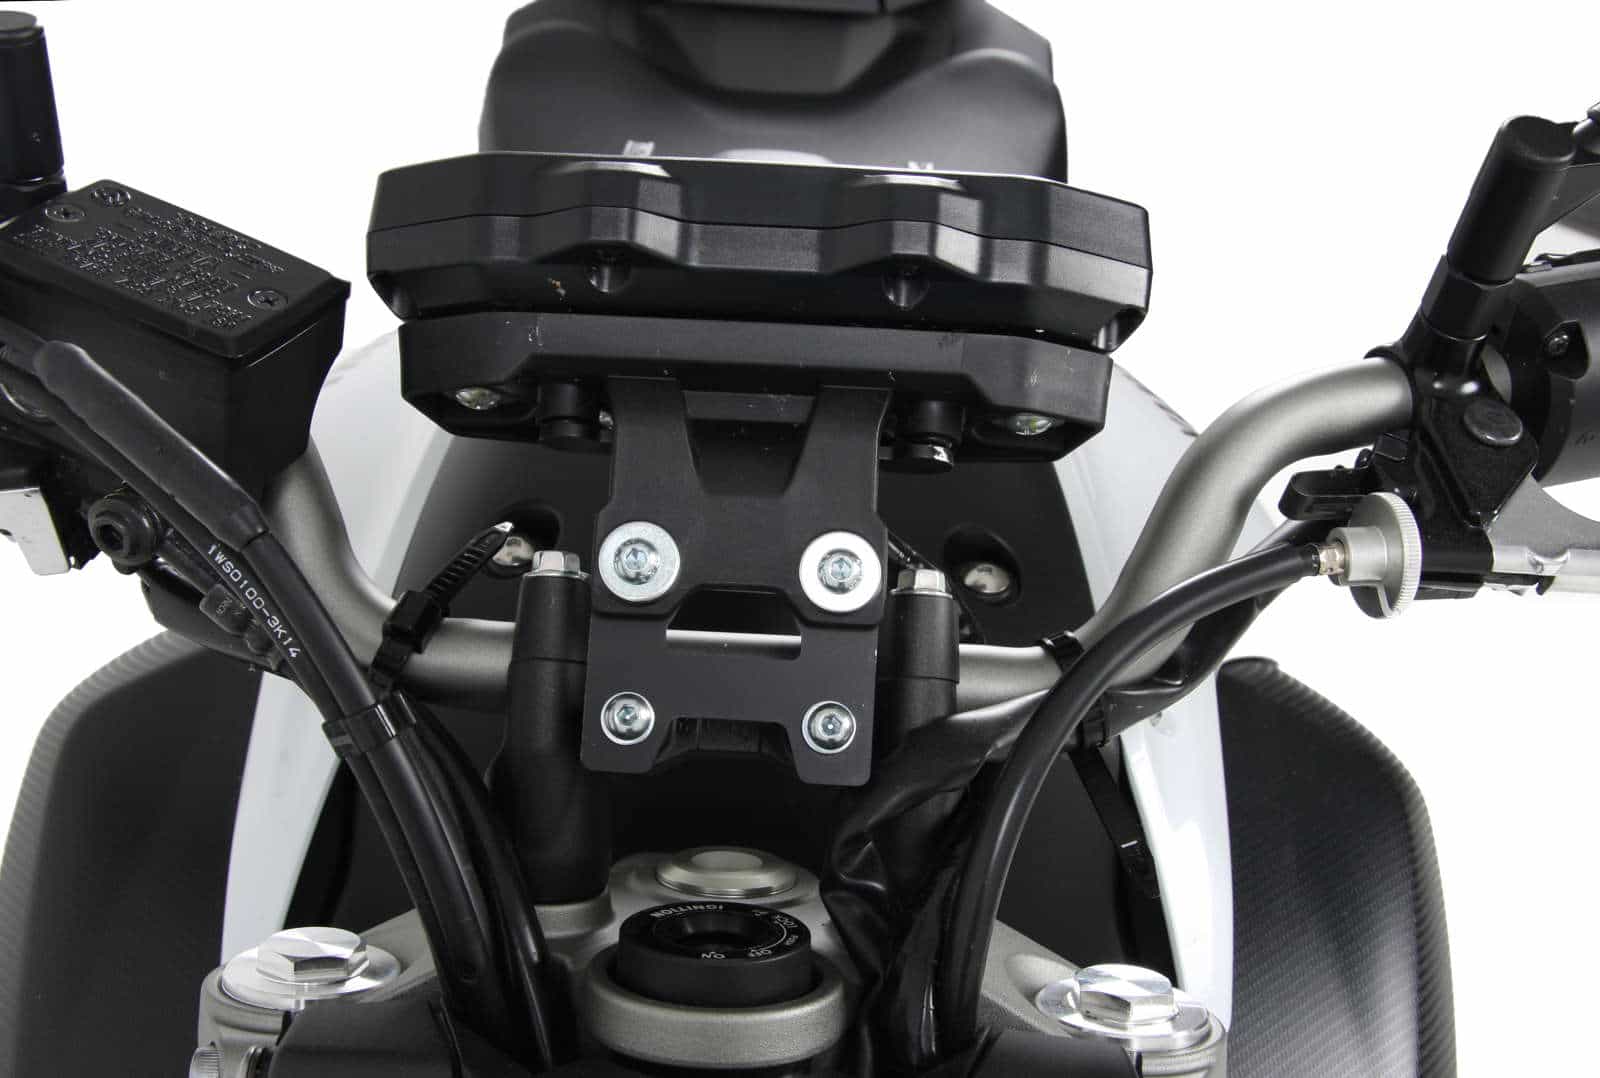 Instrument panel moving for Yamaha MT-07 (2014-2017)